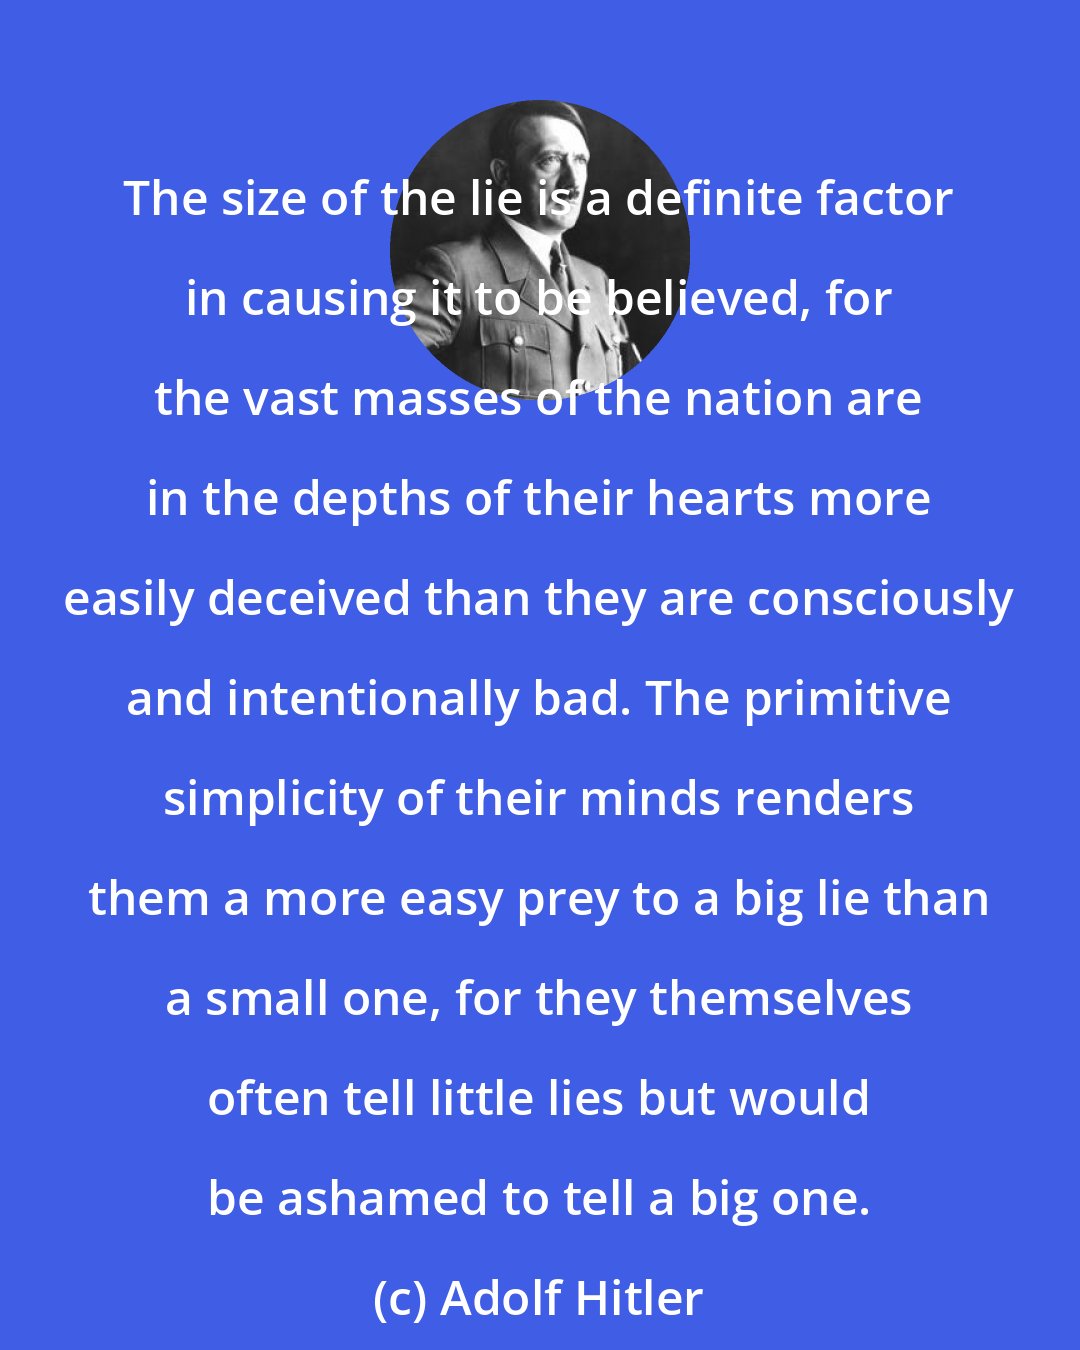 Adolf Hitler: The size of the lie is a definite factor in causing it to be believed, for the vast masses of the nation are in the depths of their hearts more easily deceived than they are consciously and intentionally bad. The primitive simplicity of their minds renders them a more easy prey to a big lie than a small one, for they themselves often tell little lies but would be ashamed to tell a big one.